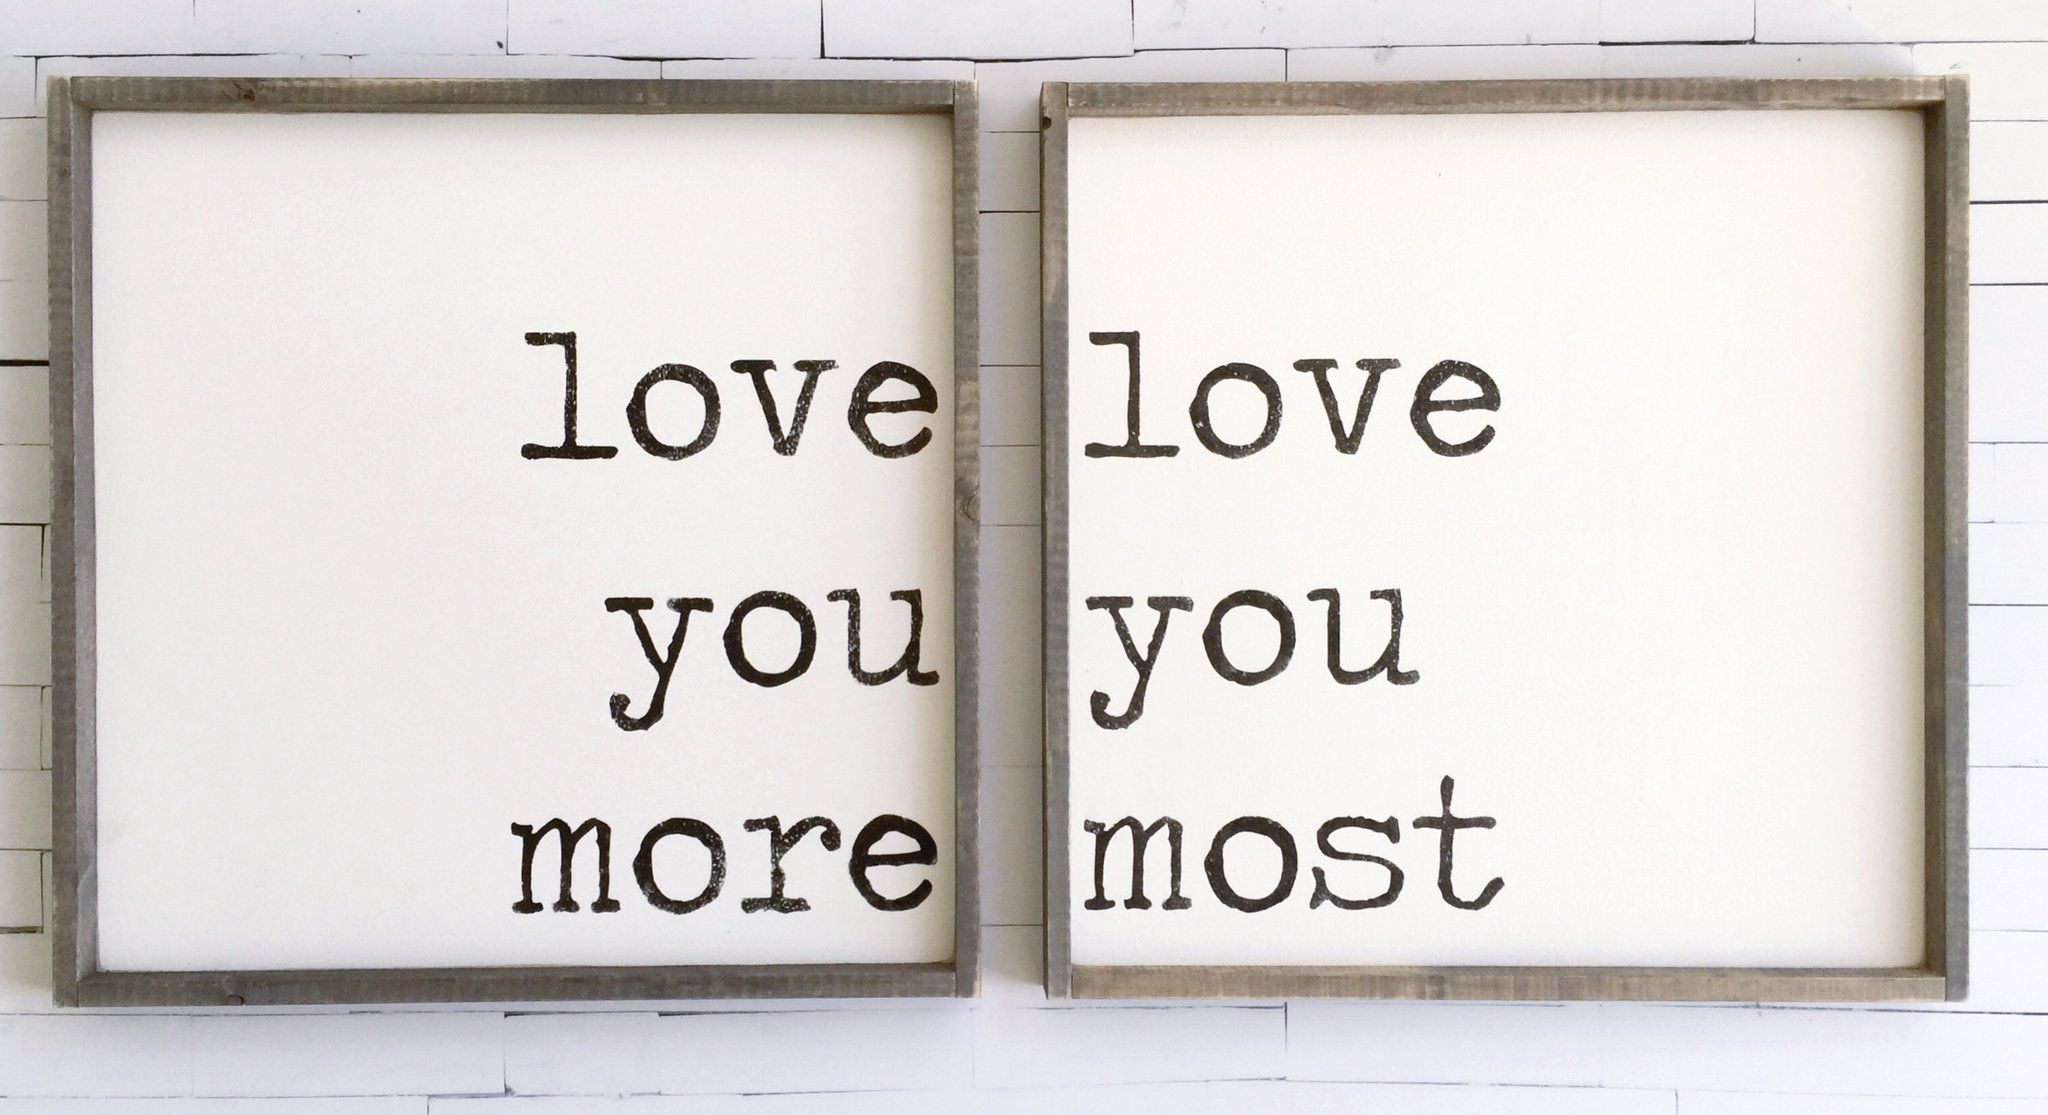 Love You More / Love You Most {SET OF TWO}. Farmhouse Style Wood